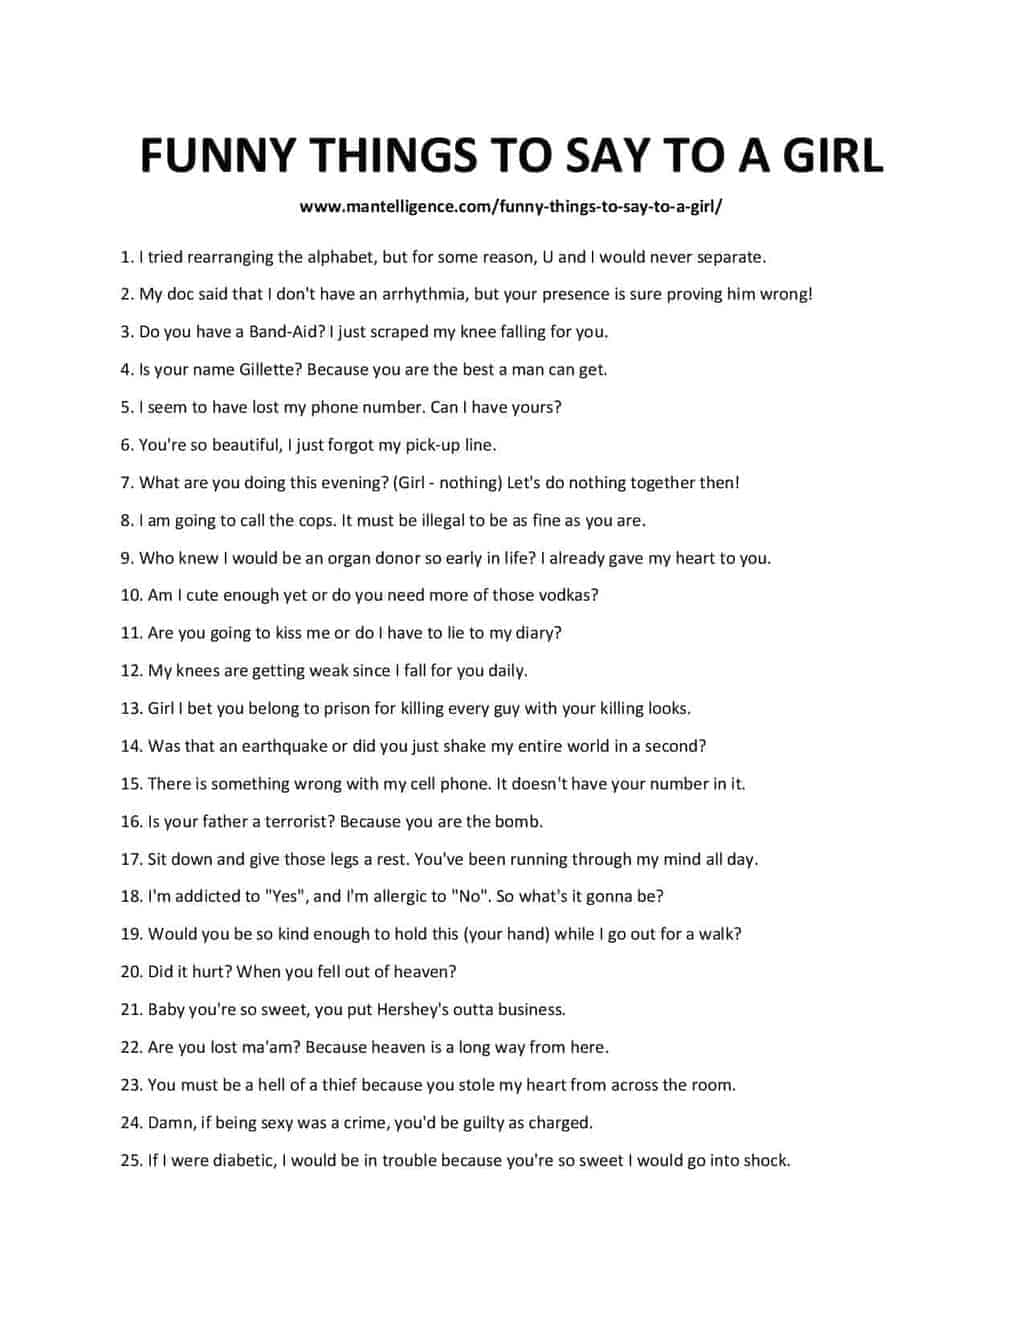 FUNNY THINGS TO SAY TO A GIRL (1)-page-001